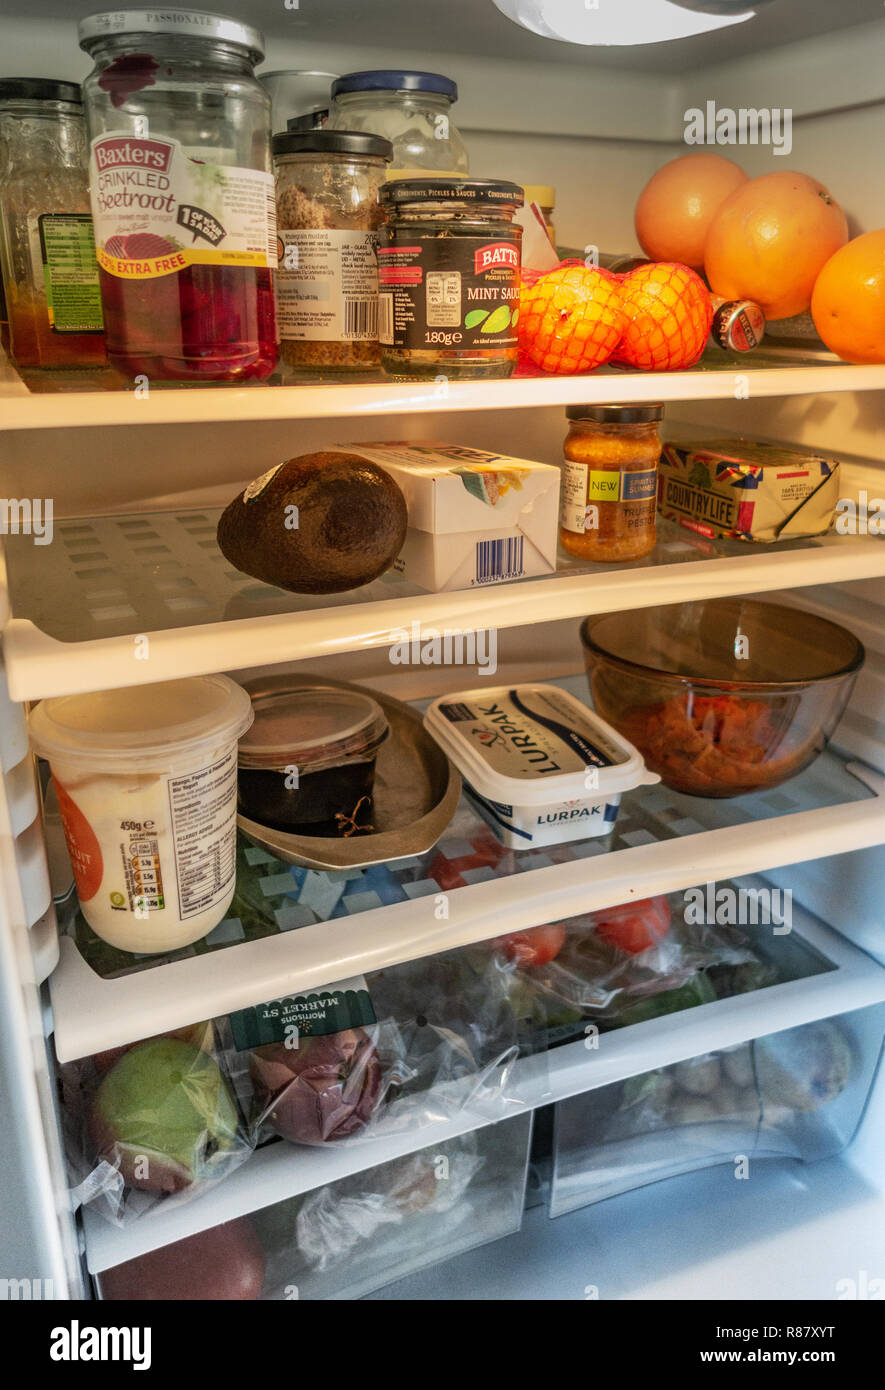 Inside view of a fridge and Contents owned by a 90 year old lady in England Stock Photo